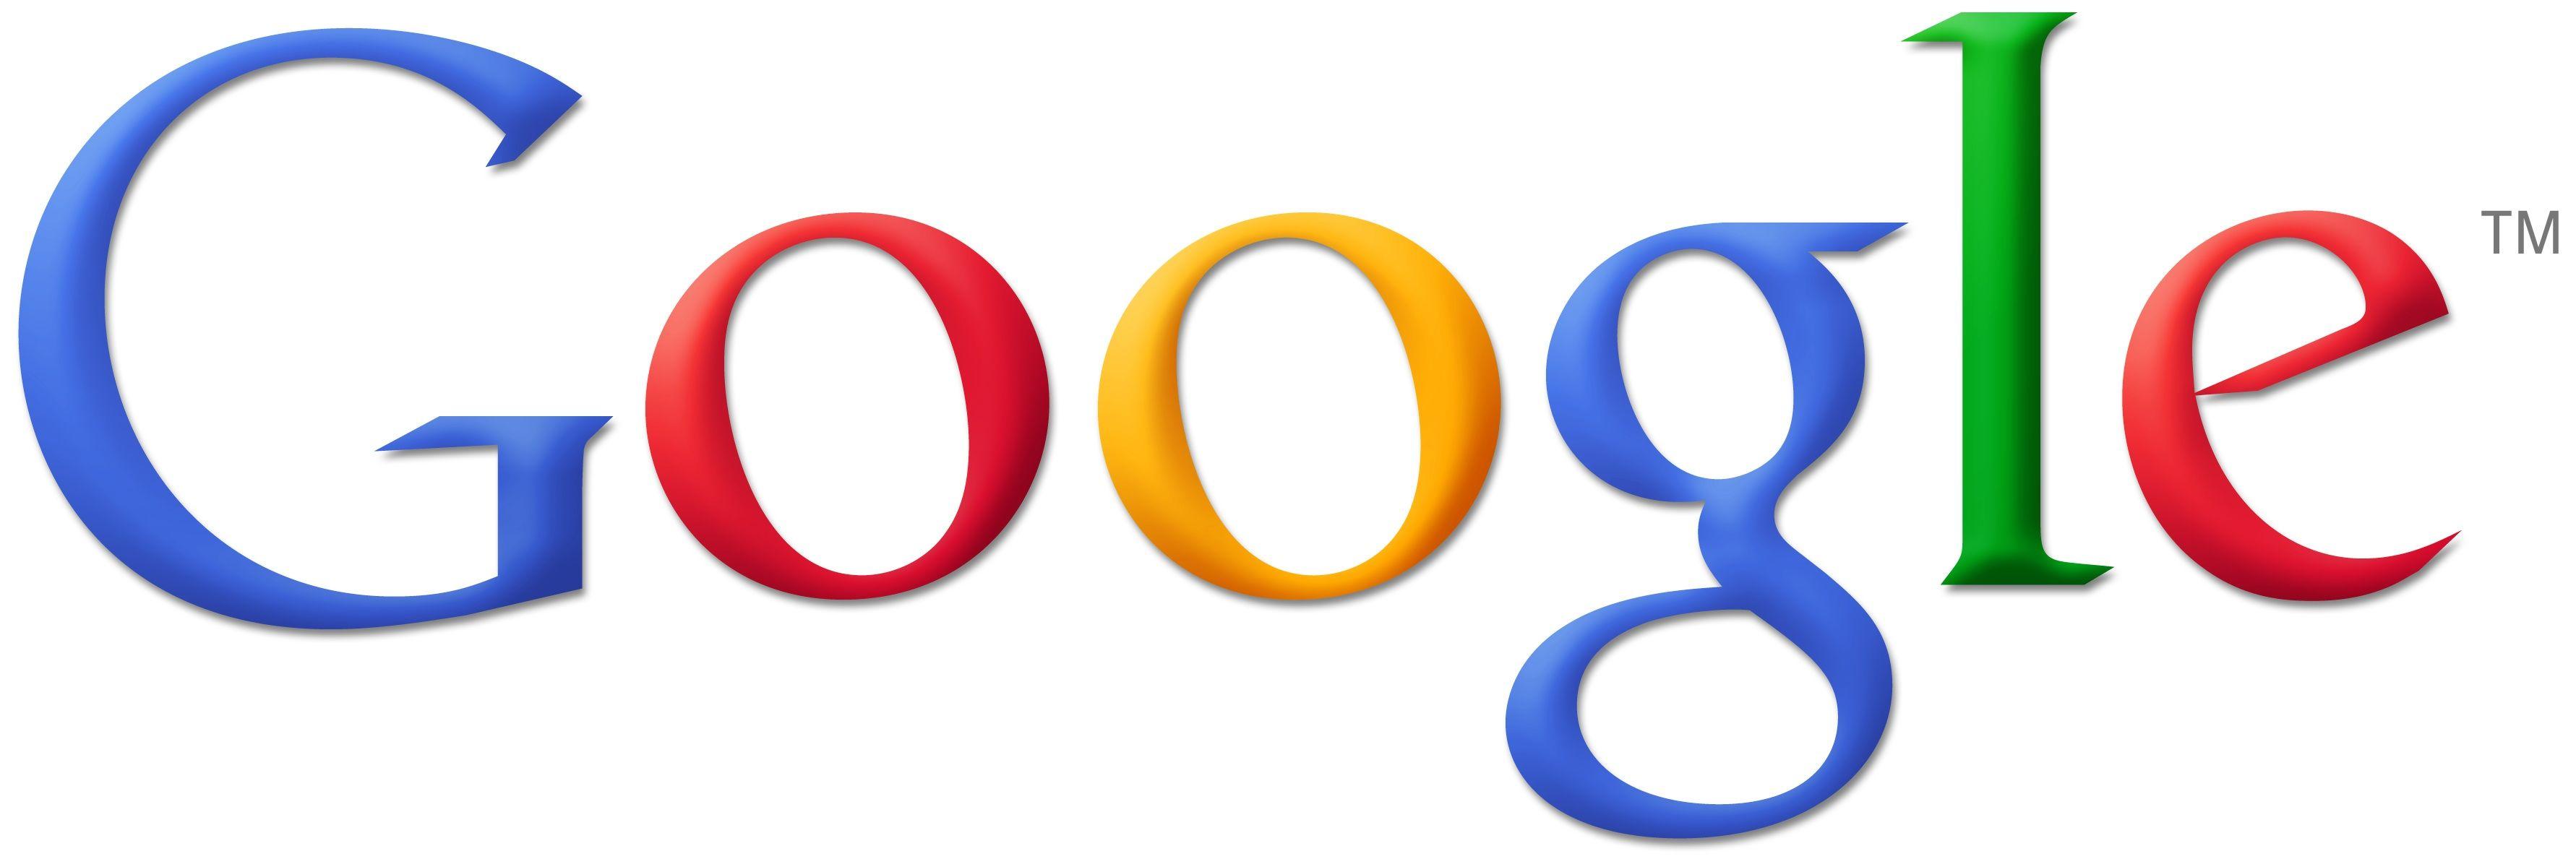 Cool Google Logo - All The Cool Tech Companies Are Rebranding, Lets Do It Too! Old